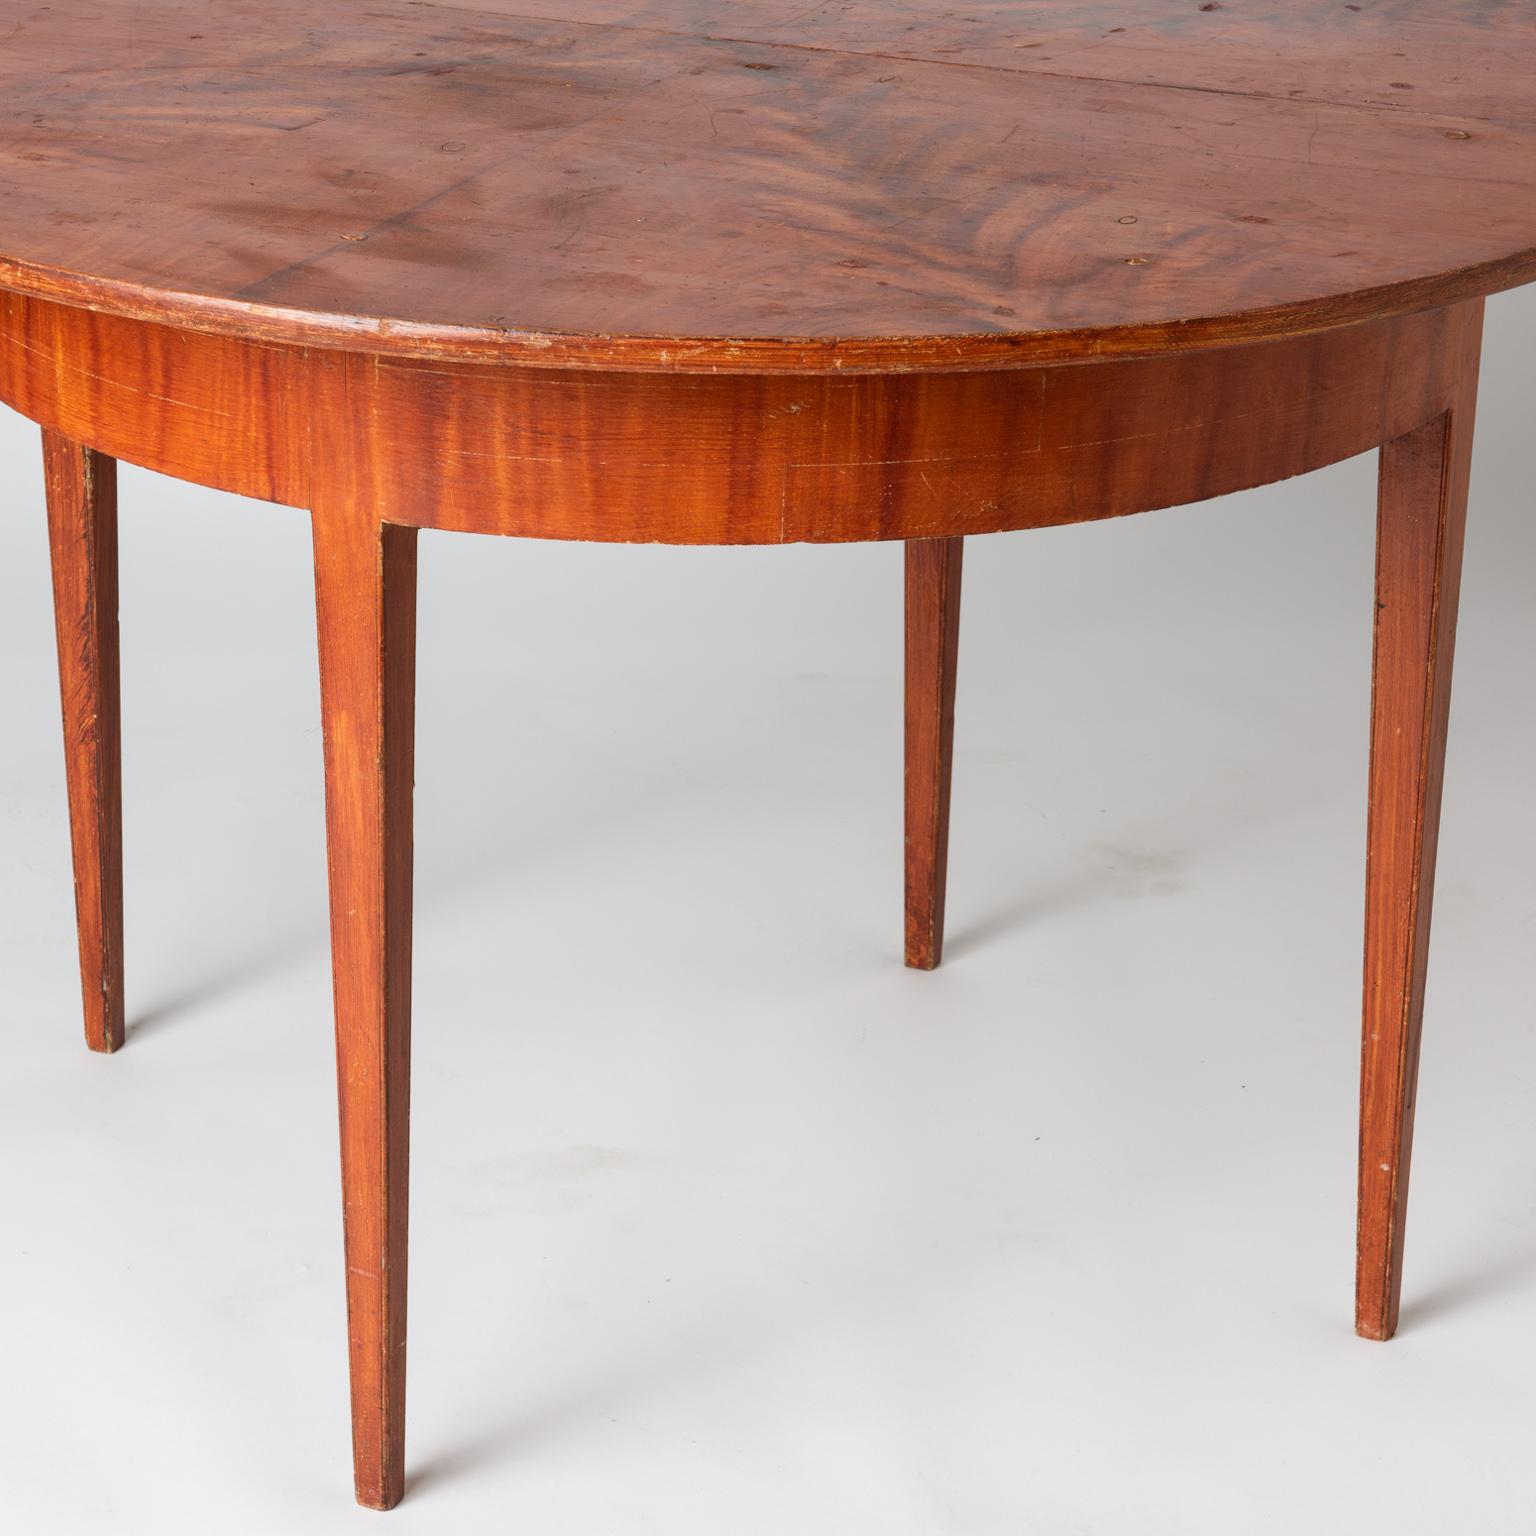 Swedish, Late Gustavian Period, Grain Painted Drop-Leaf Table, circa 1820 For Sale 1